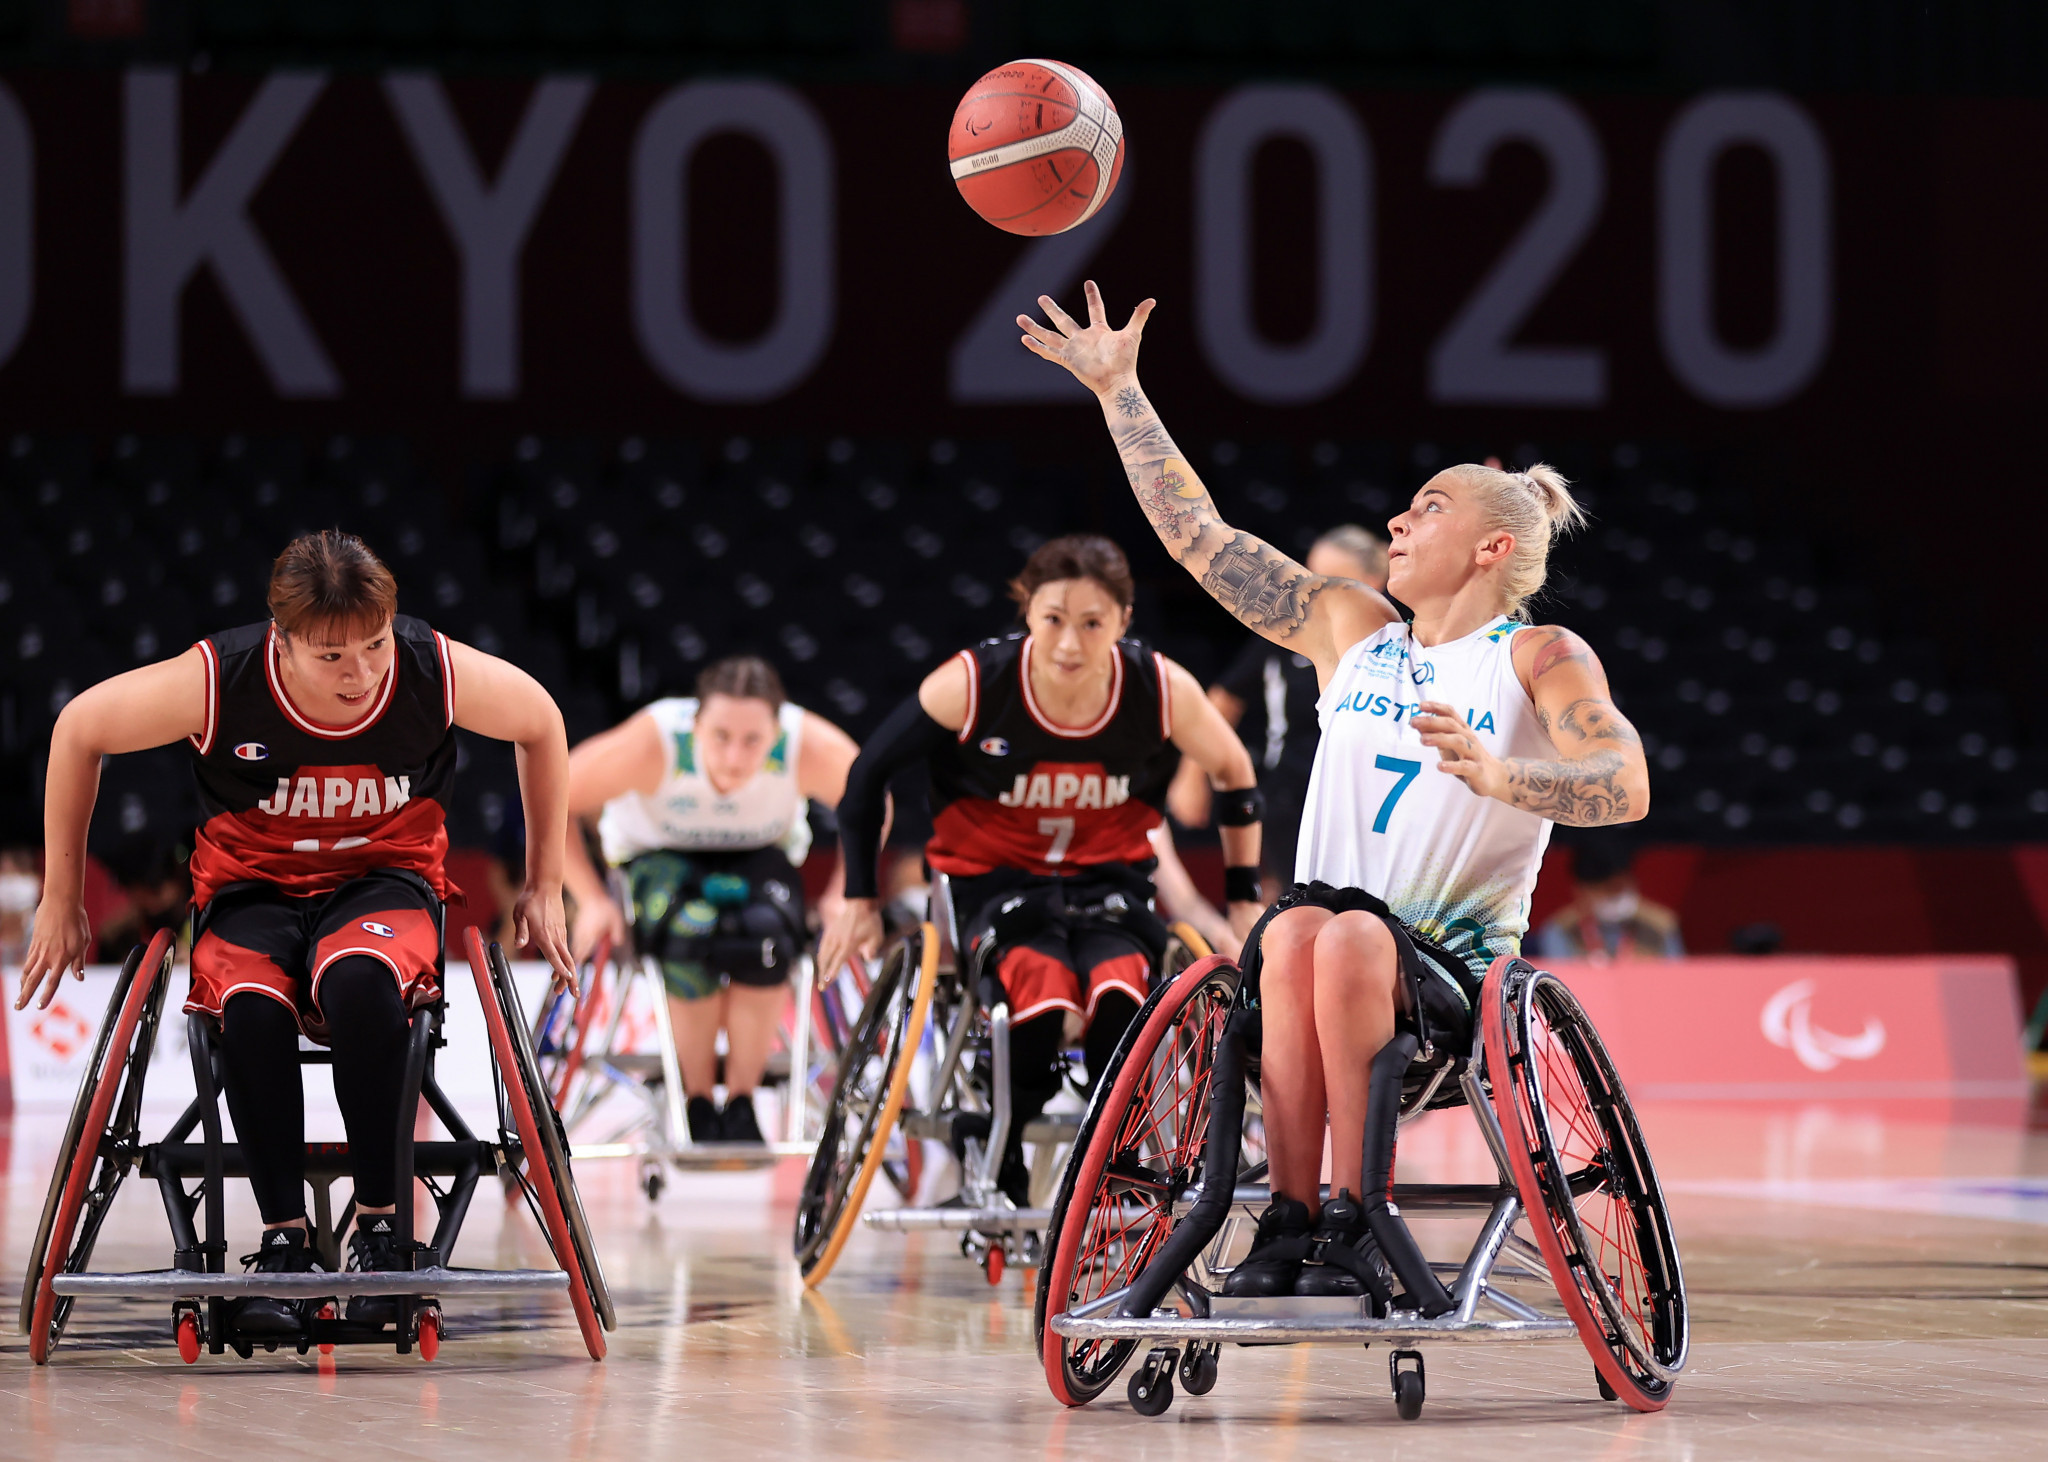 Women's wheelchair basketball has been on the programme for the Summer Paralympics since 1968 ©Getty Images